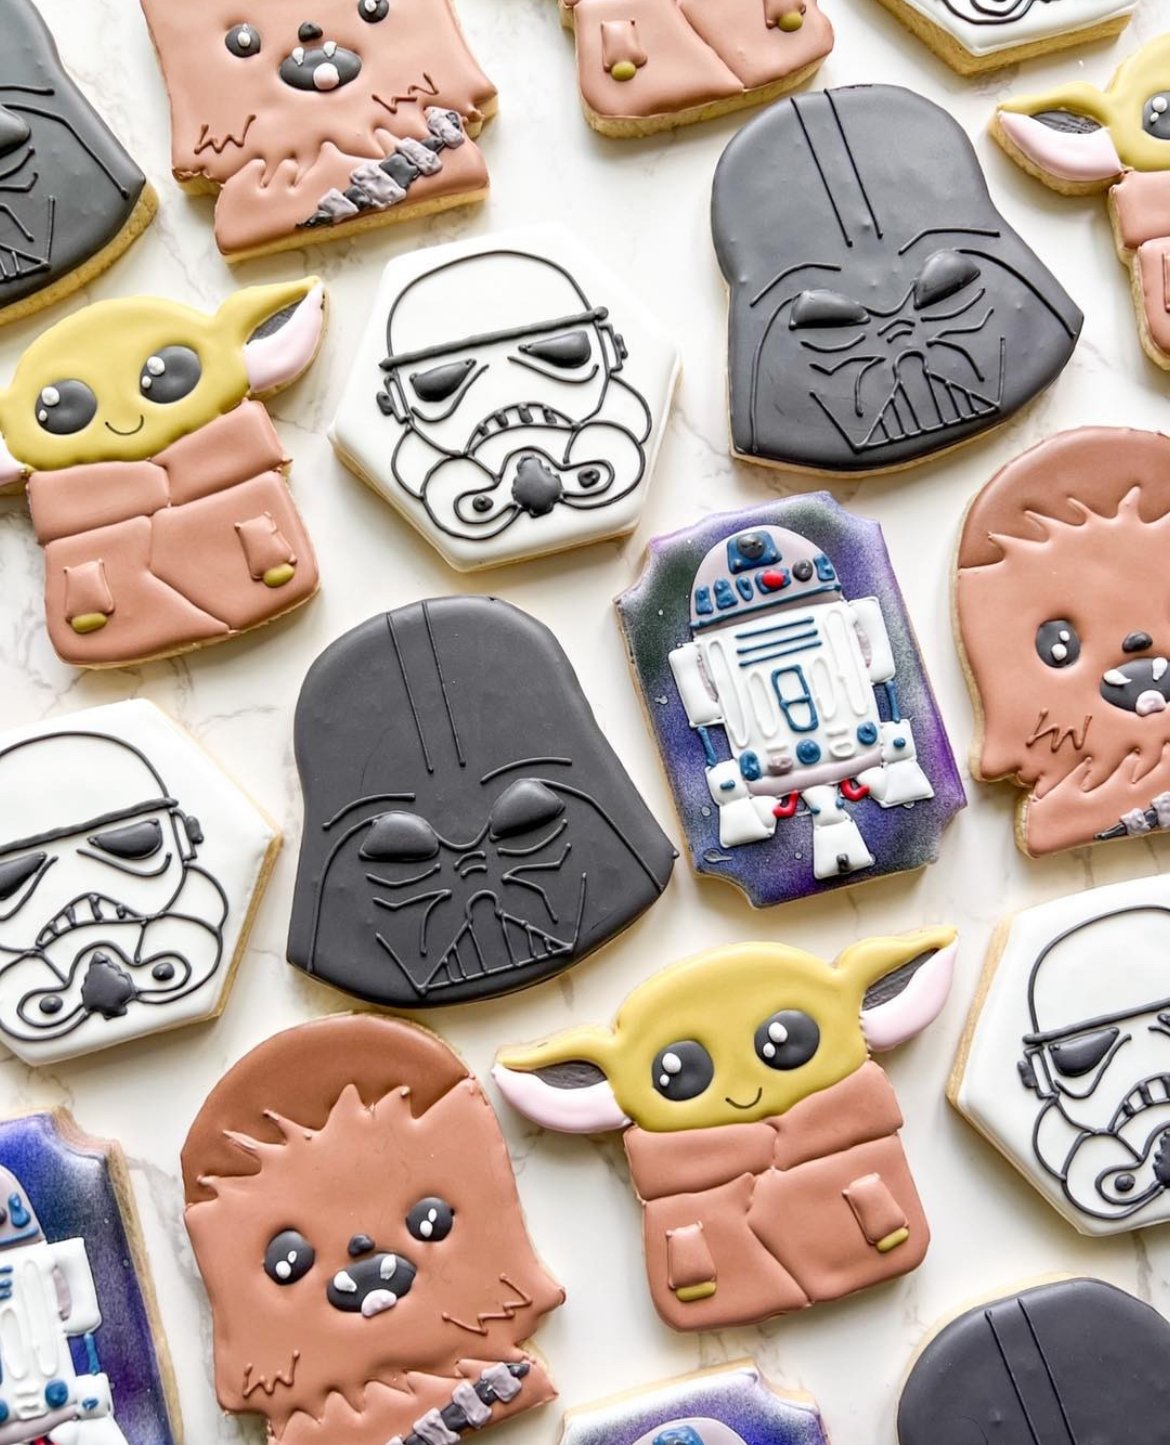 💫 May the Fourth Be With You 💫
&bull;
🇮🇱 My heart is always with the people of Israel 🇮🇱 #amyisraelchai #stopjewhate #bringthemhome
&bull;
#Sweetsbymichelle #sweets #desserts #cookies #customcookies #sugarcookies #sugarcookiemarketing #sugarcoo